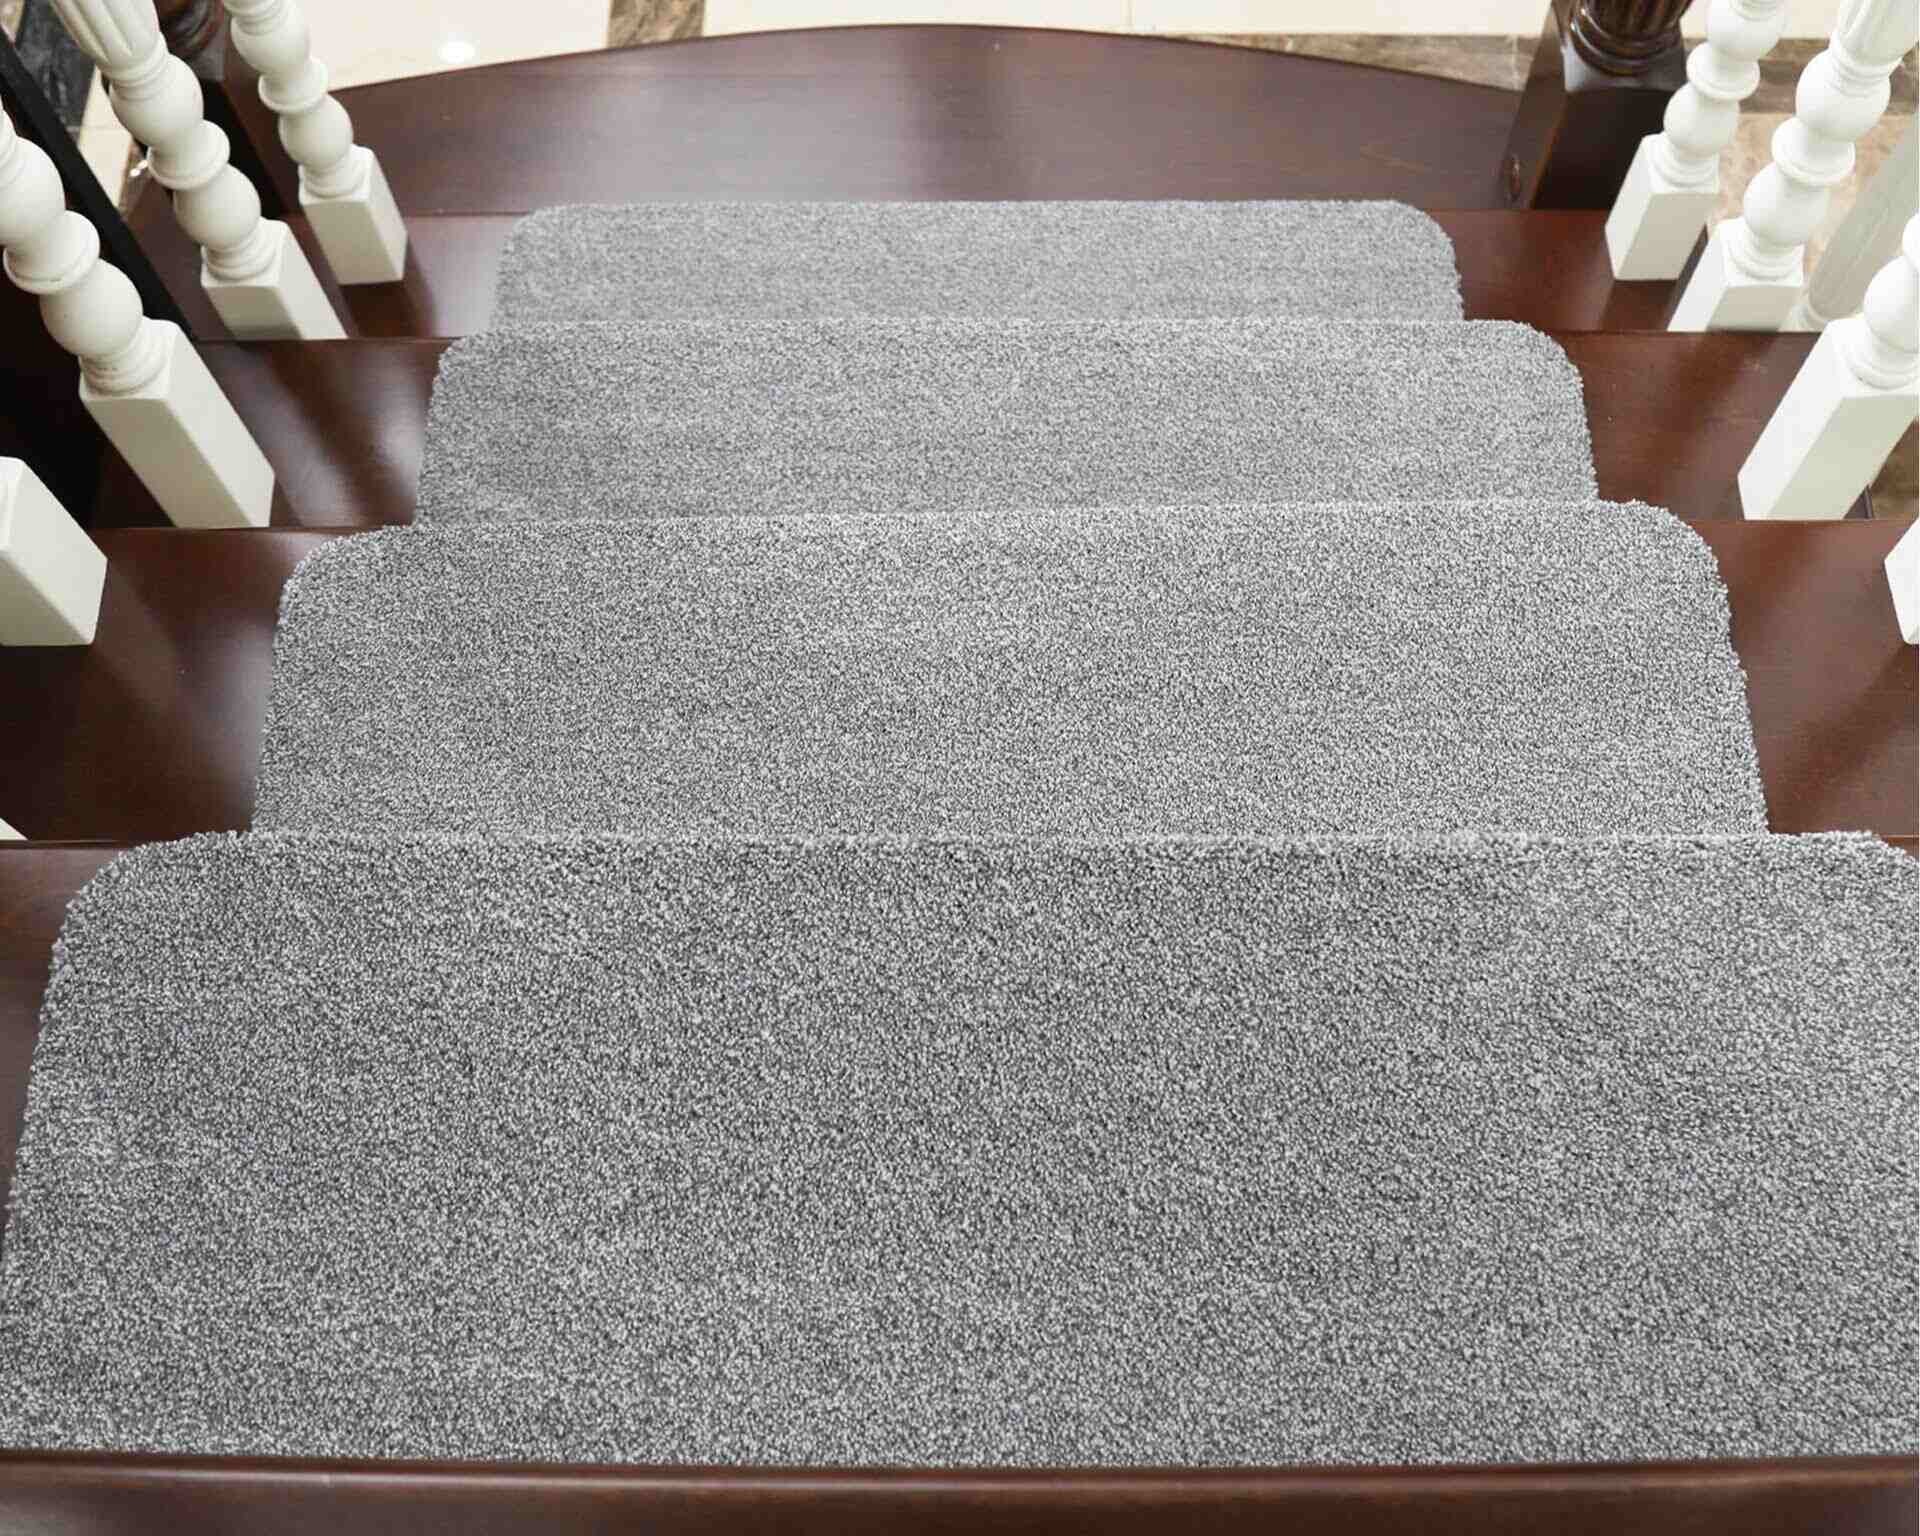 10 Incredible Stair Rugs For 2023 1697456536 